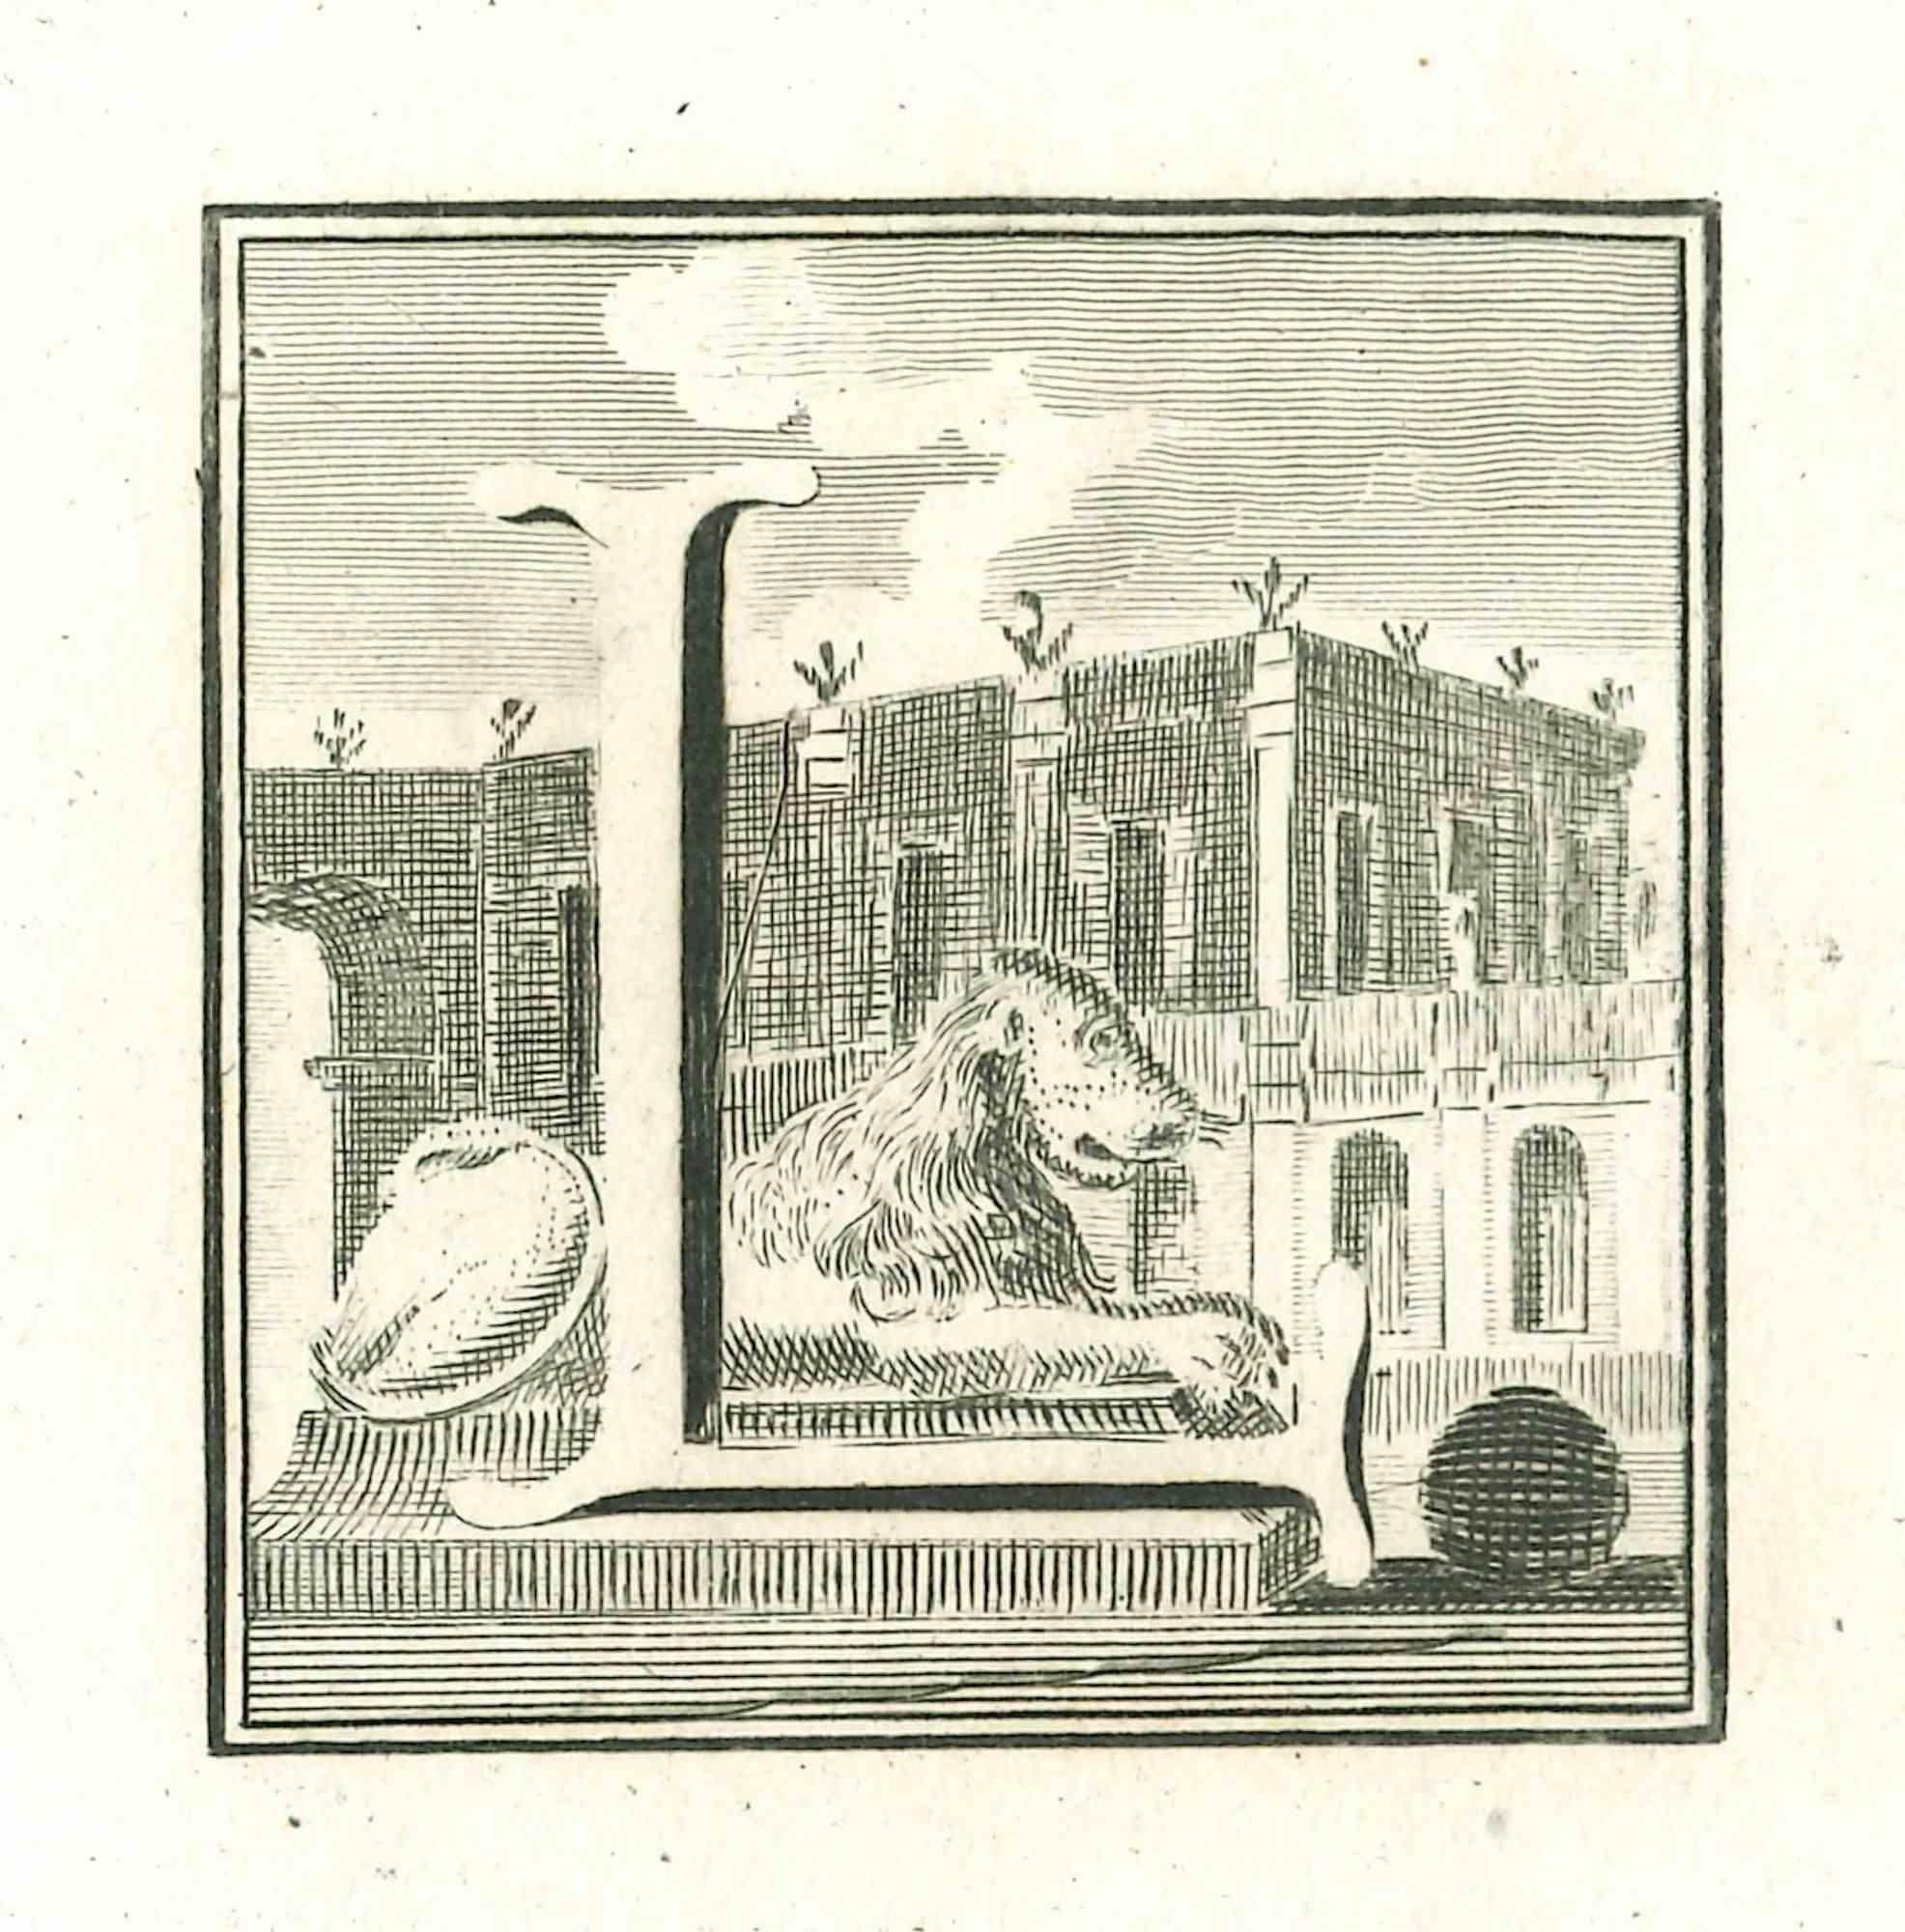 Unknown Figurative Print - Capital Letter L for the Antiquities of Herculaneum Exposed-Etching-18th Century